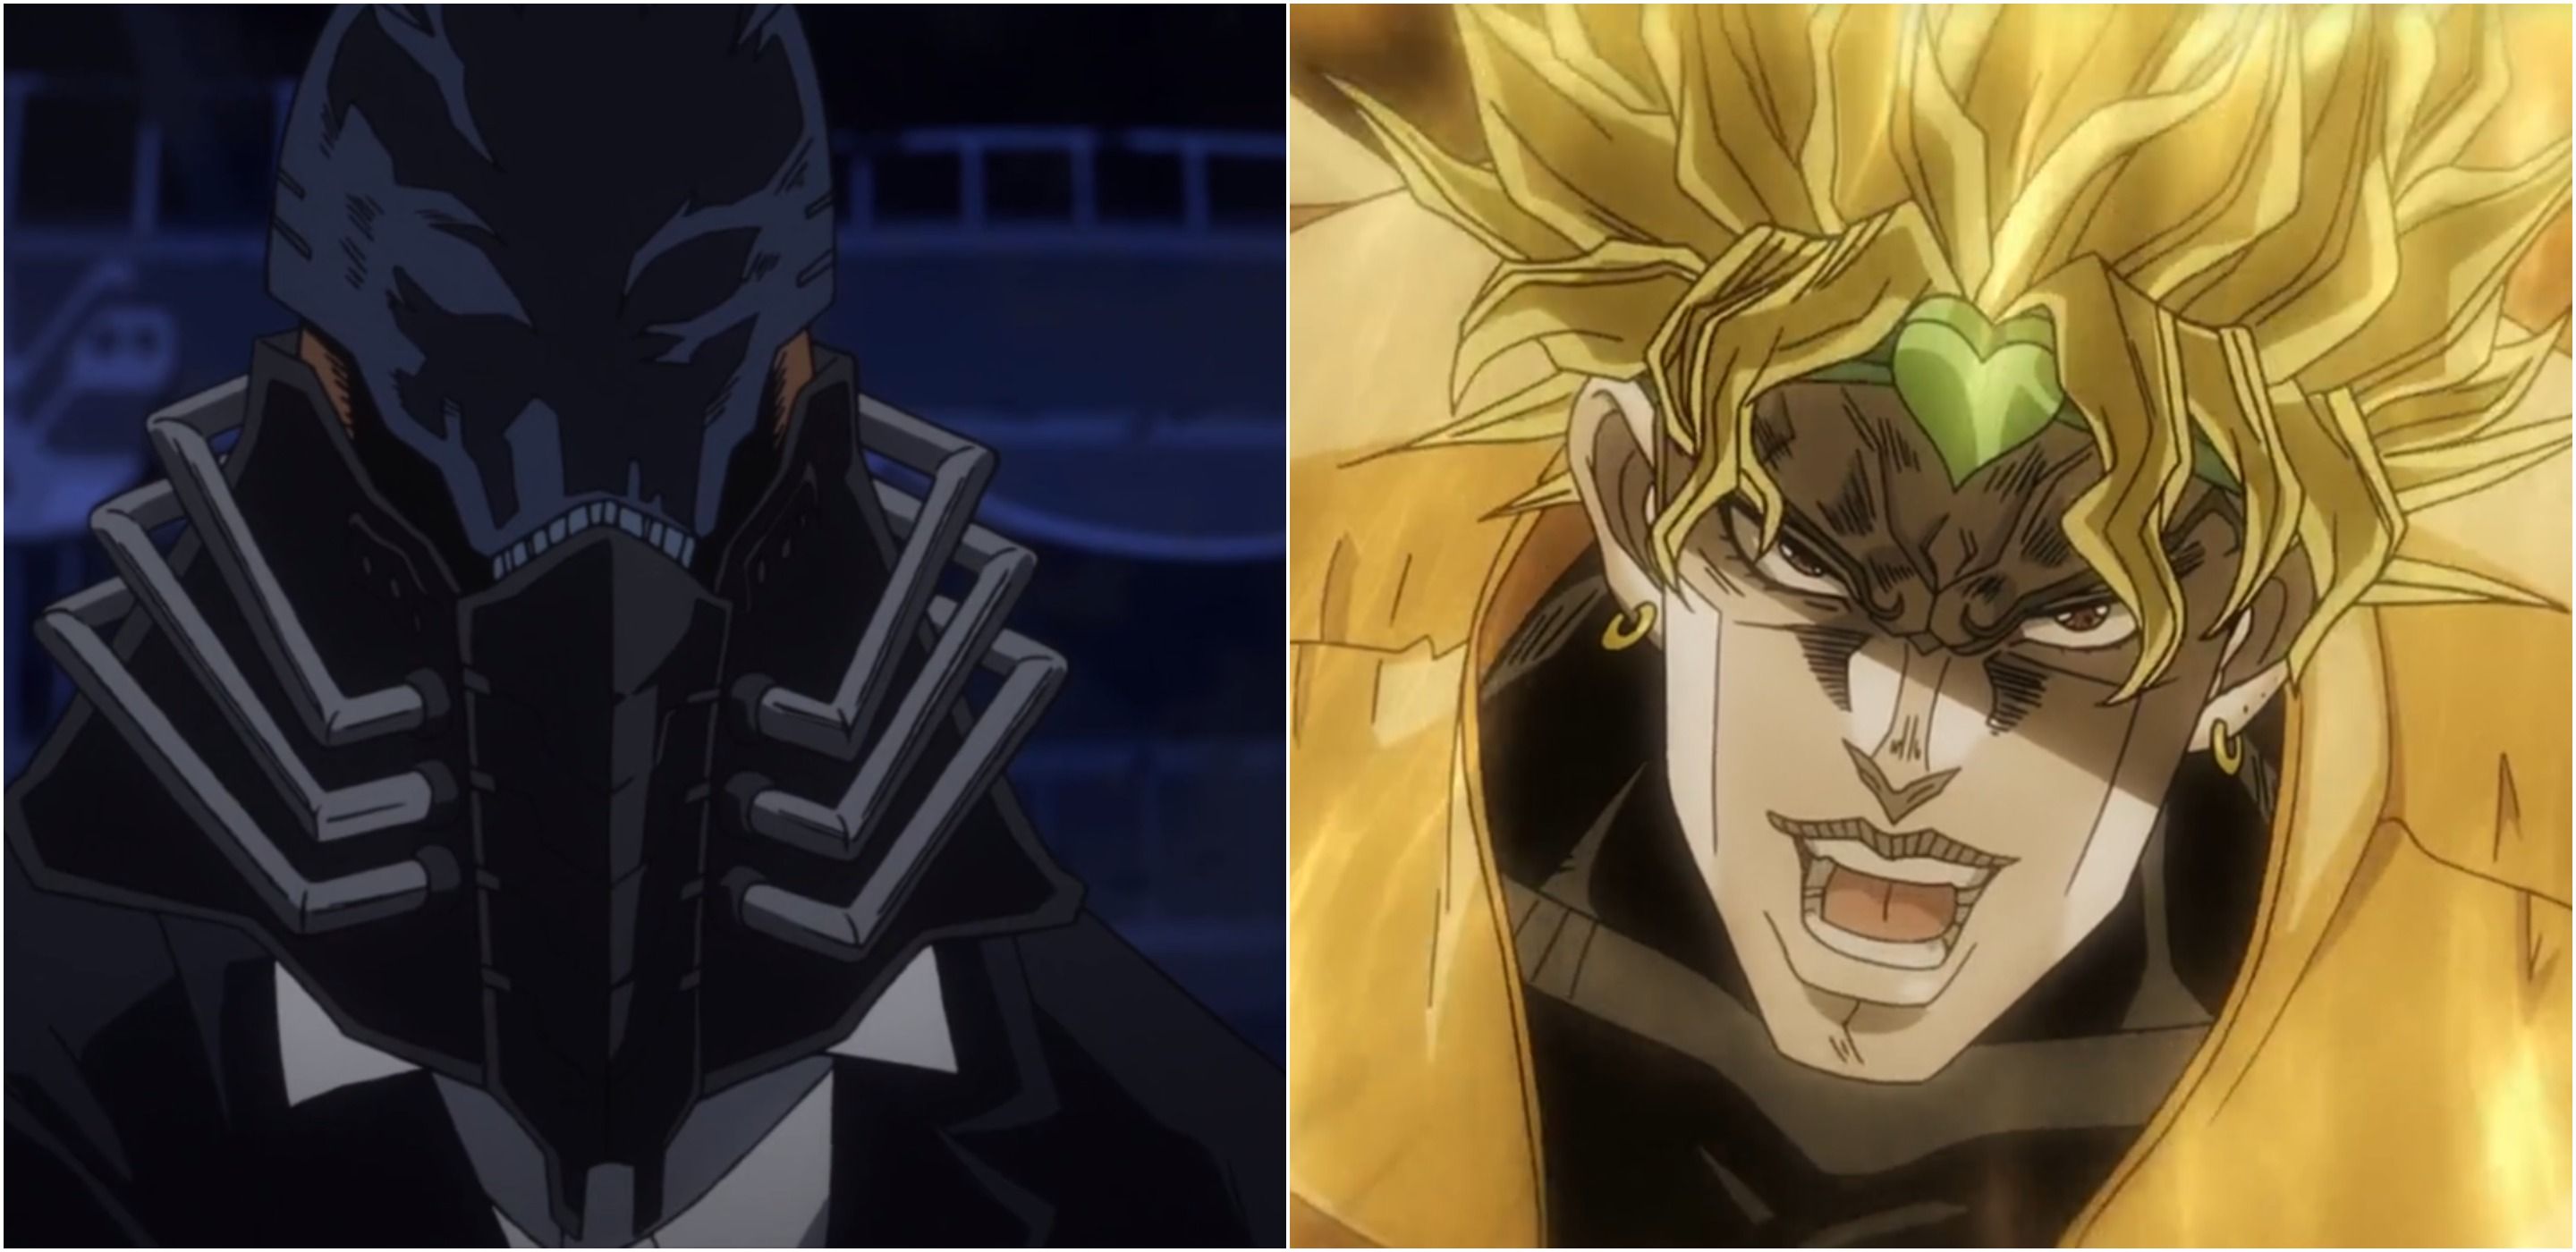 All For One Moments Before Facing All Might in Season 3 of My Hero Academia and Dio Brando in Season 3 of JoJo's Bizzare Adventure